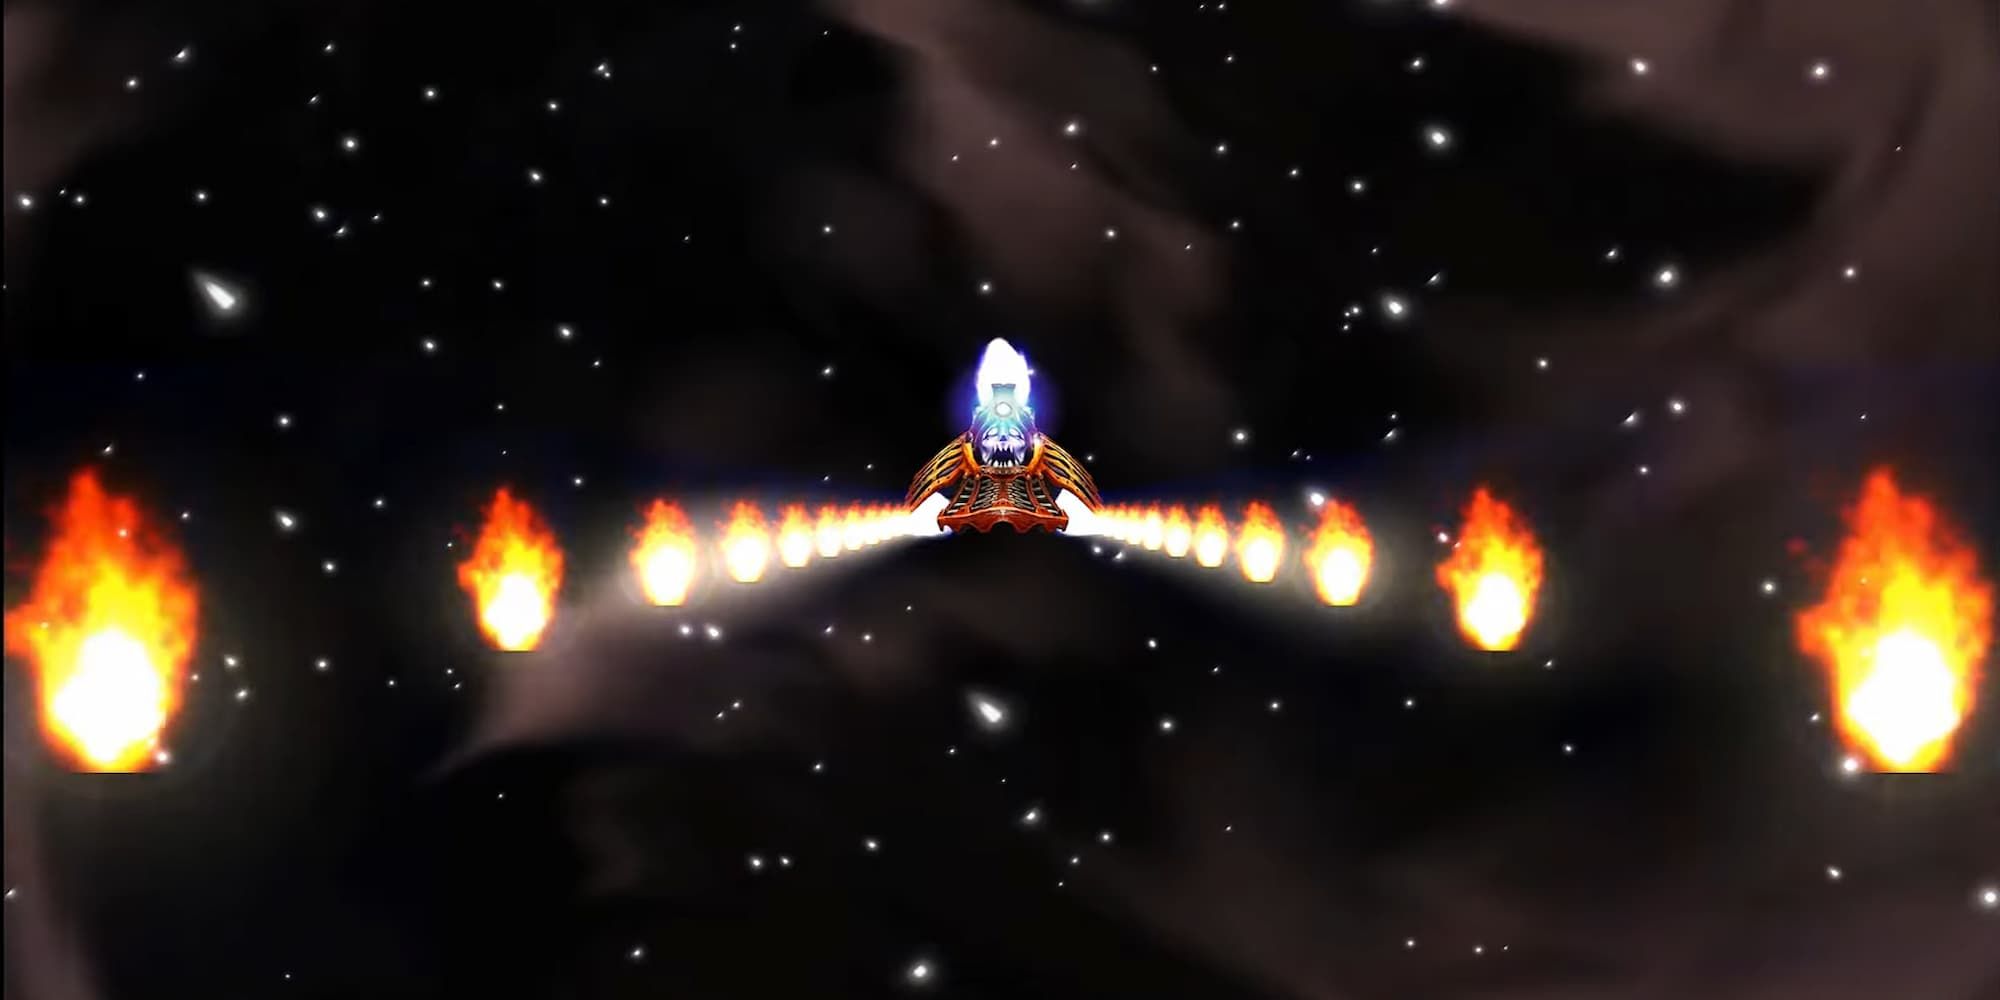 FF8 Doomtrain far shot of giant train moving through space on tracks made of fire 